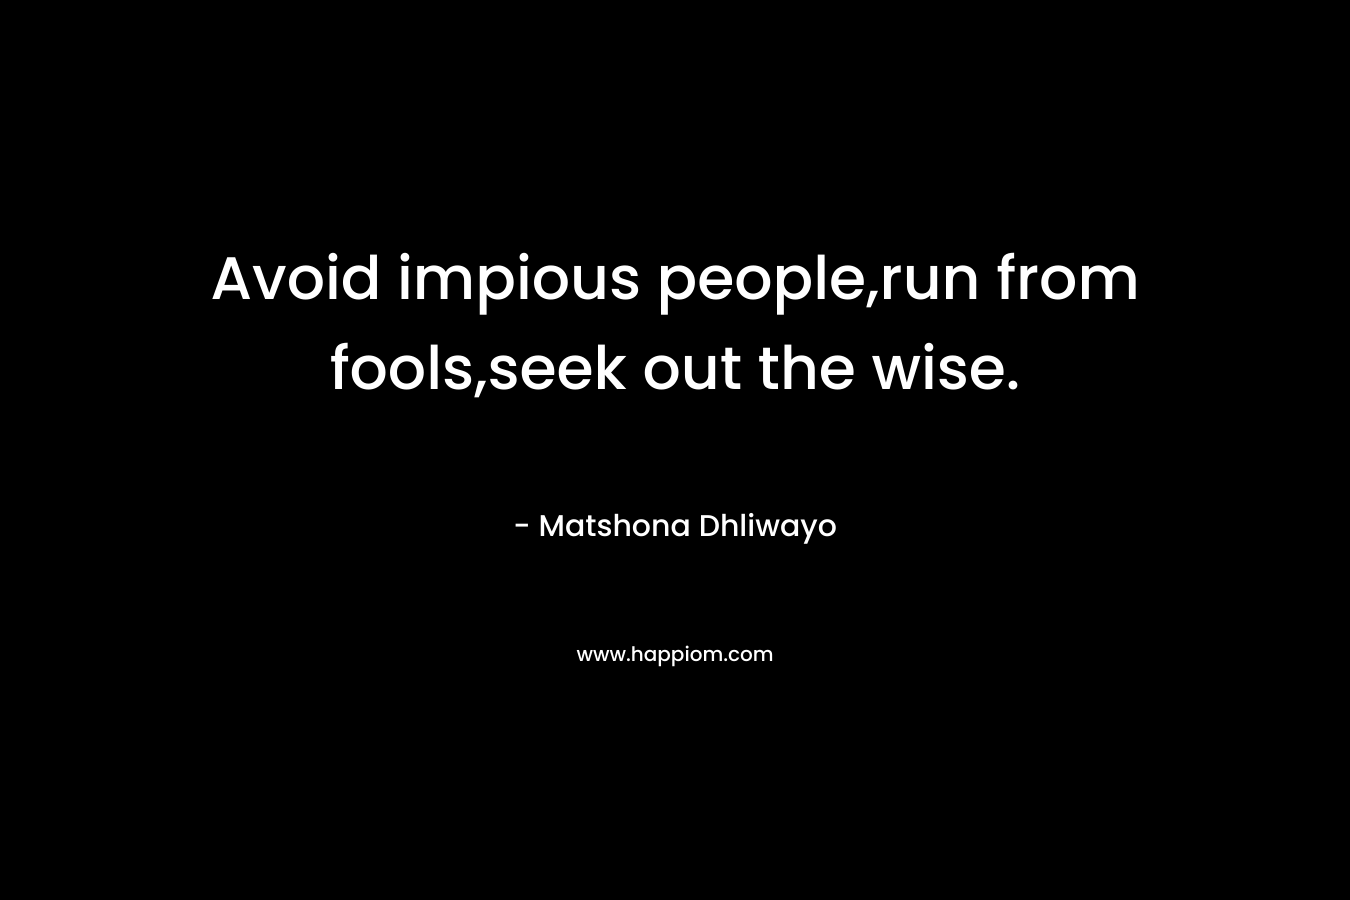 Avoid impious people,run from fools,seek out the wise.